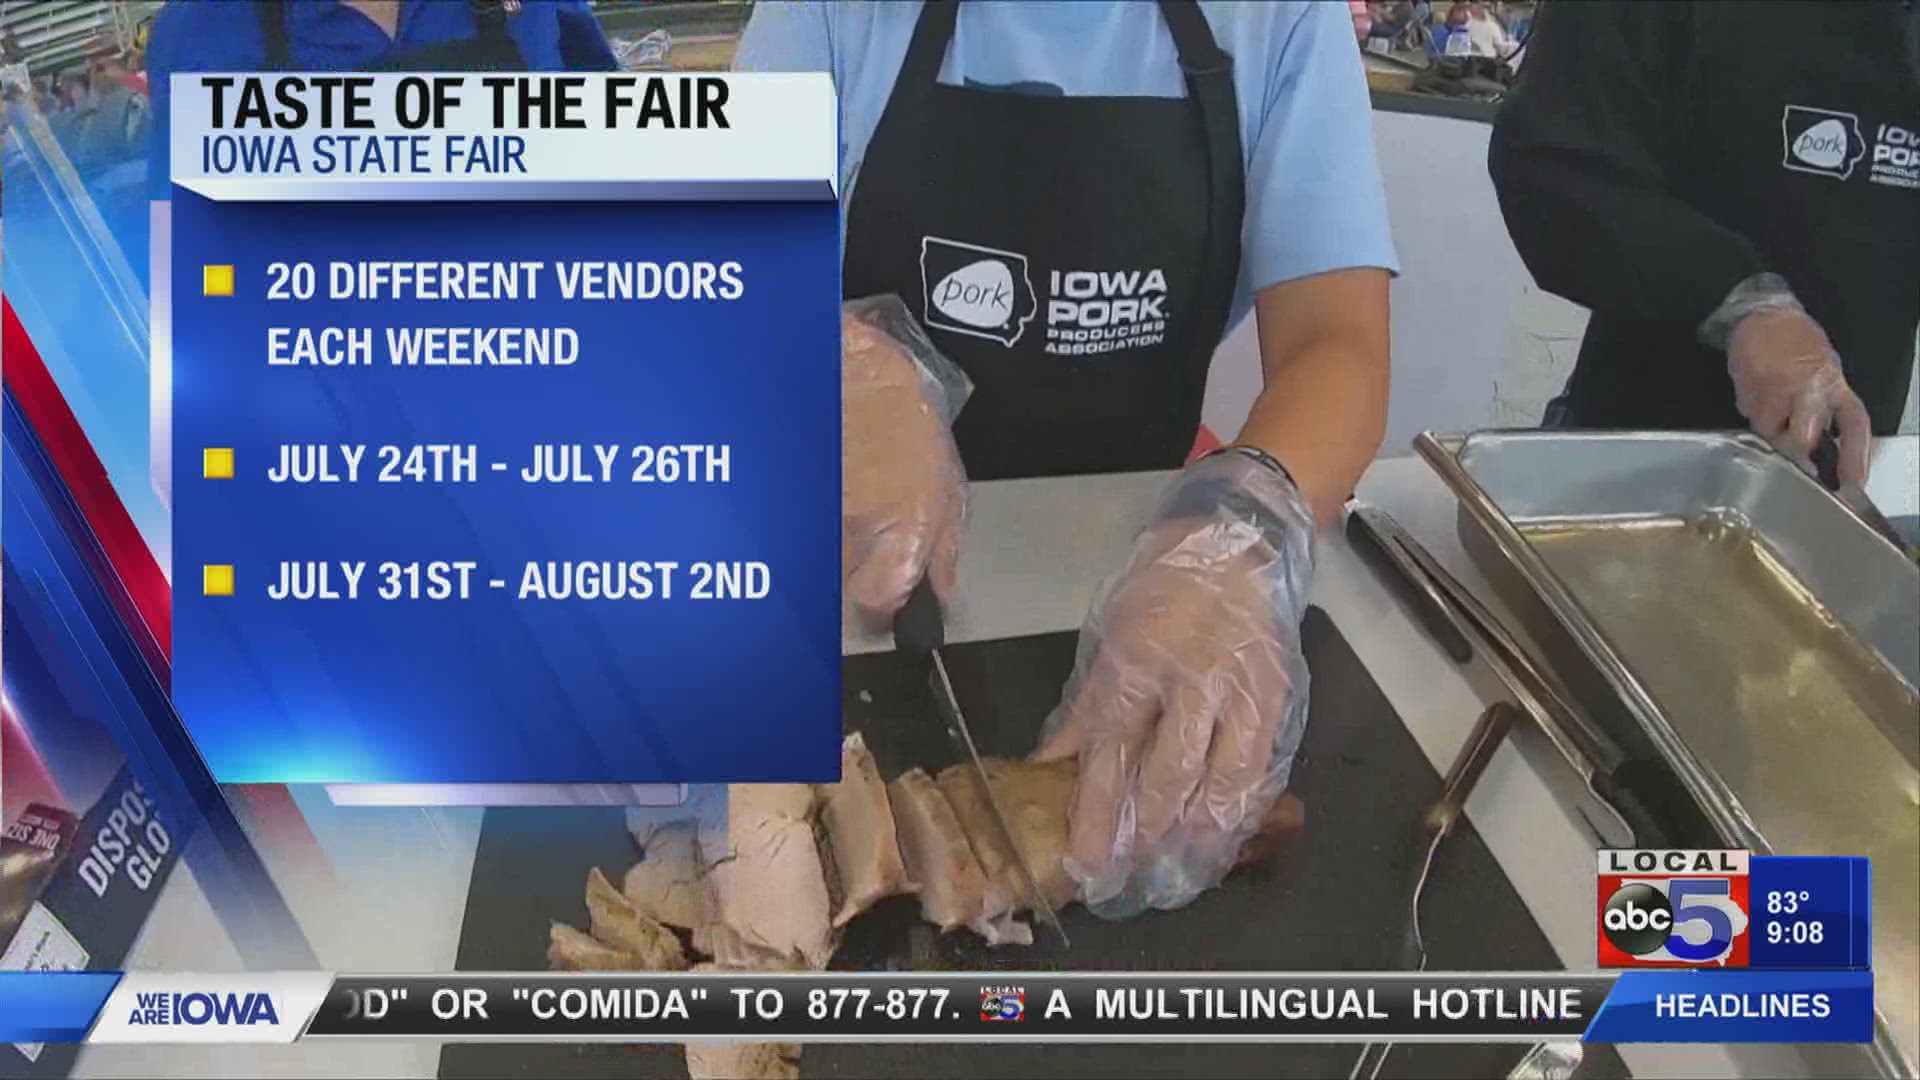 The Iowa State Fair may be closed, but you can still get a taste of some of your favorite tasty (and often deep-fried) treats for two weekends in late July.